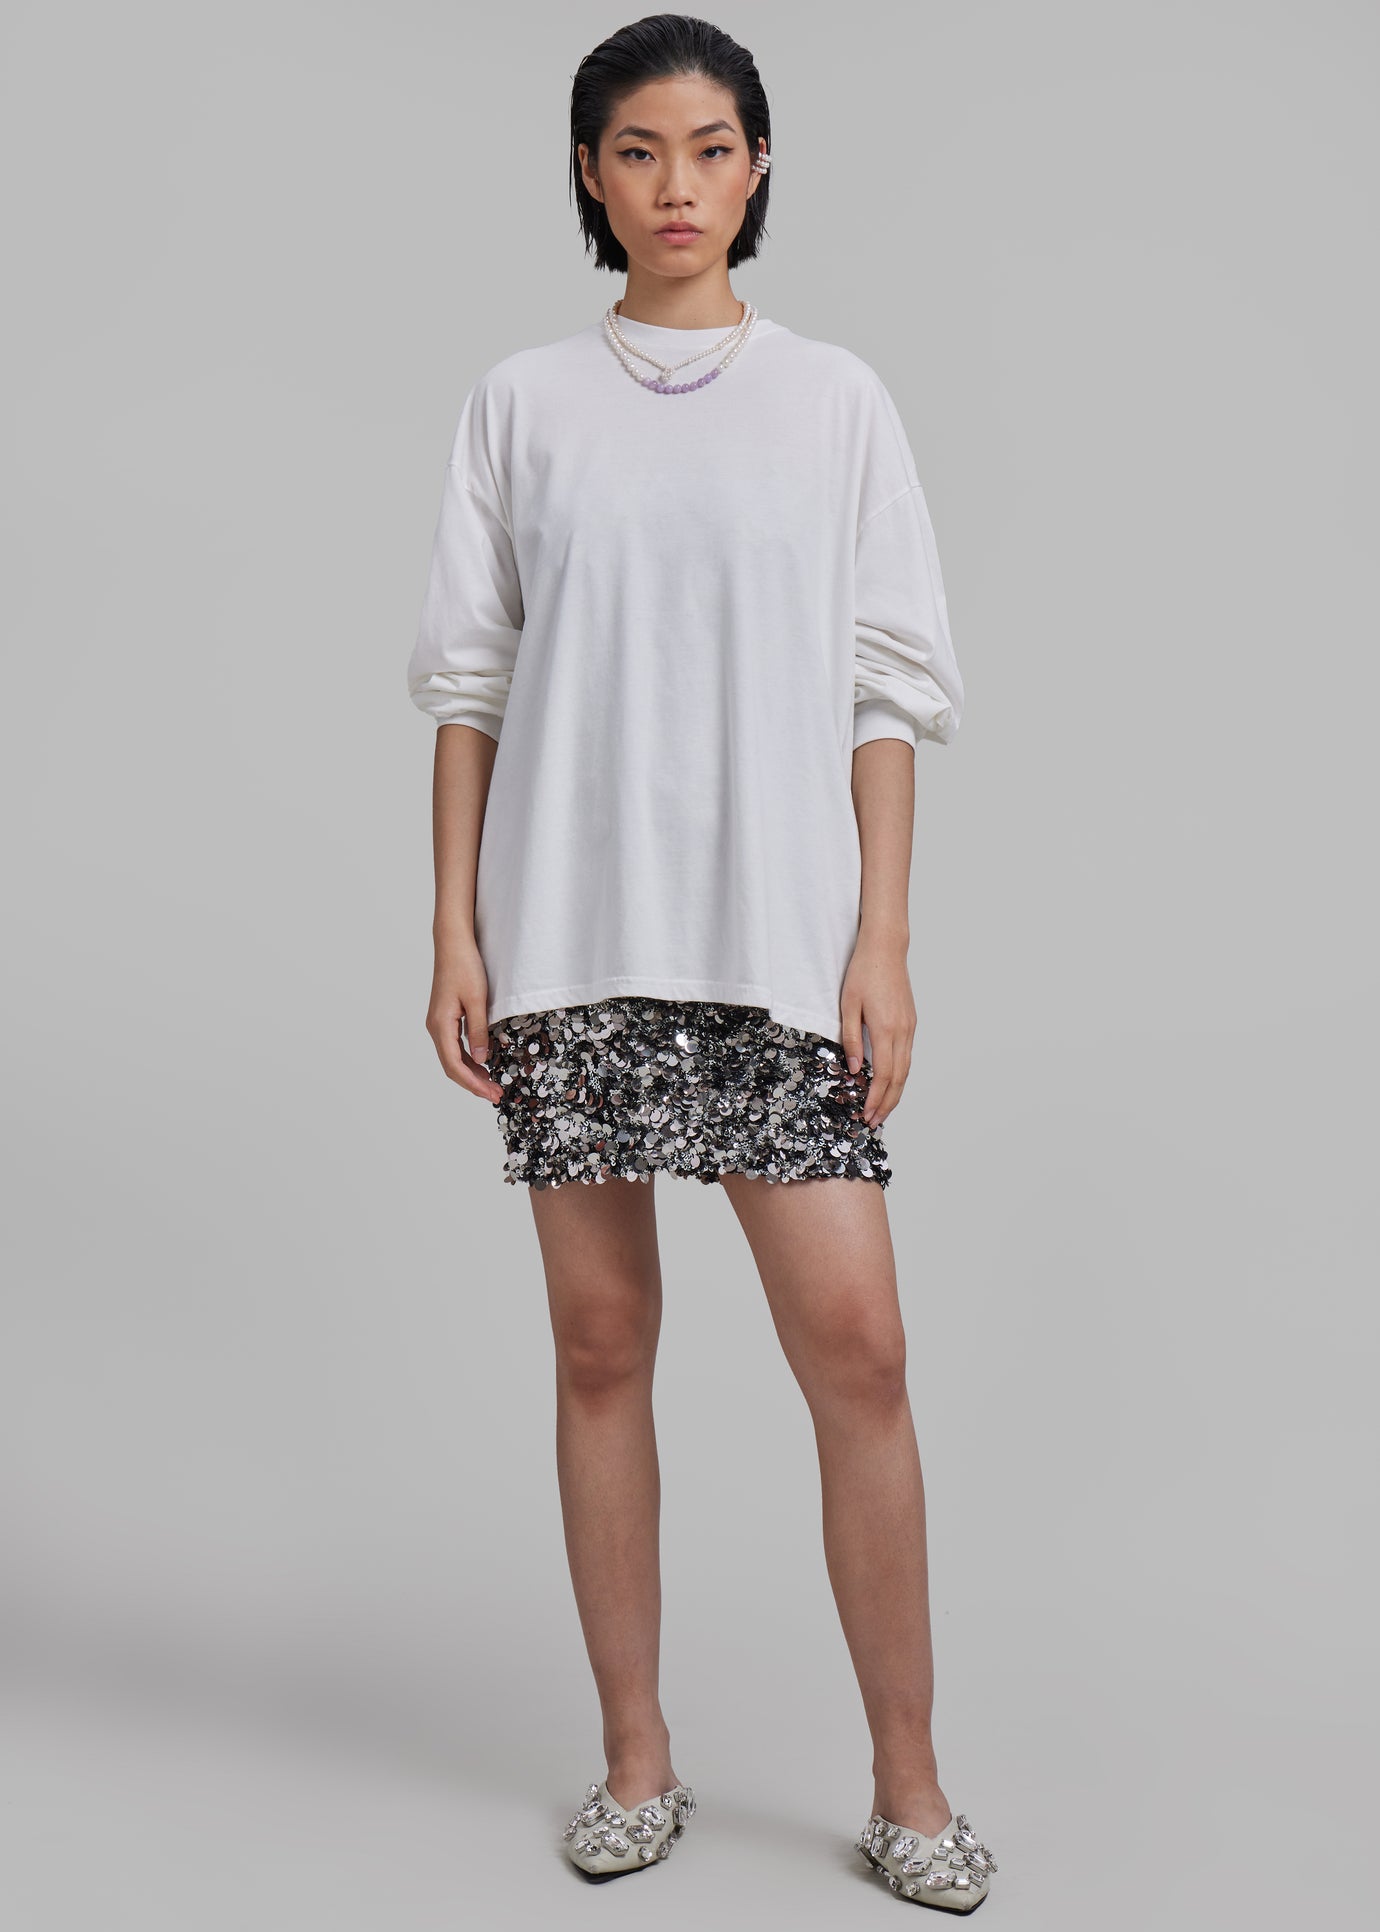 Tommy Boxy Long Sleeves Tee - White - 1